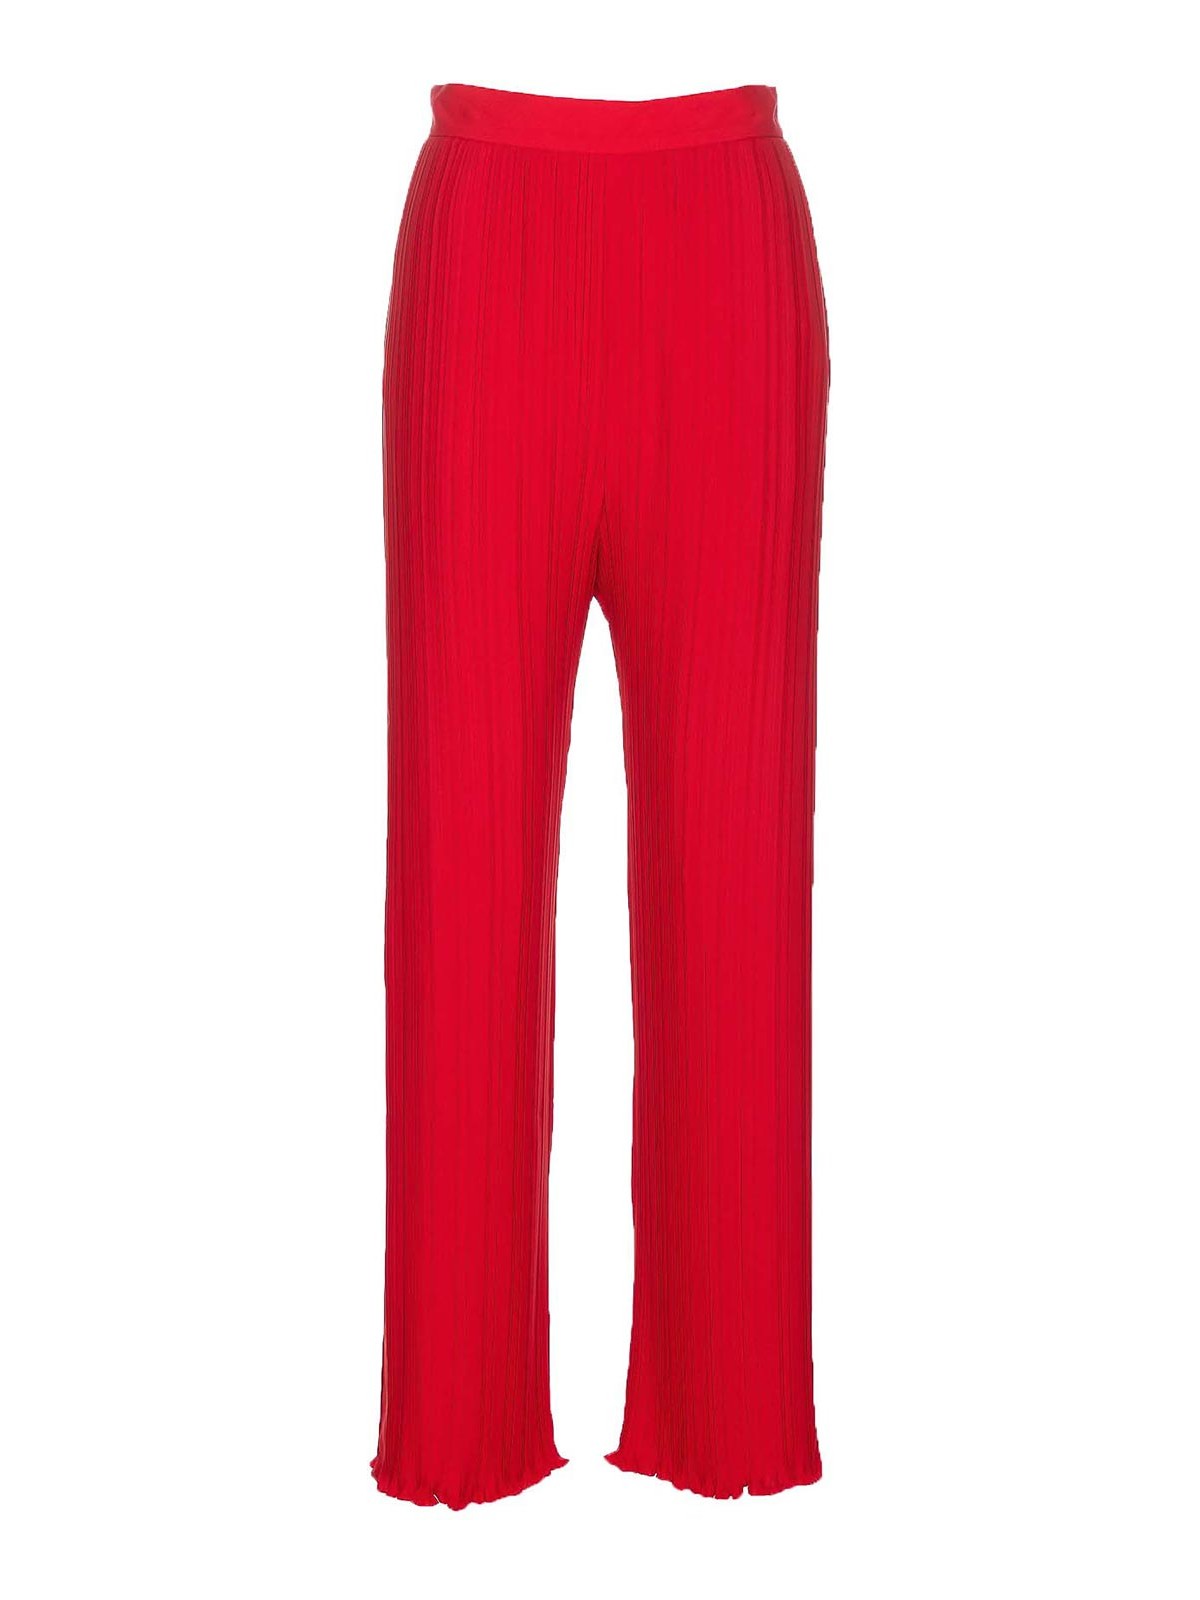 Lanvin Red Pleated Pants Lateral Zip